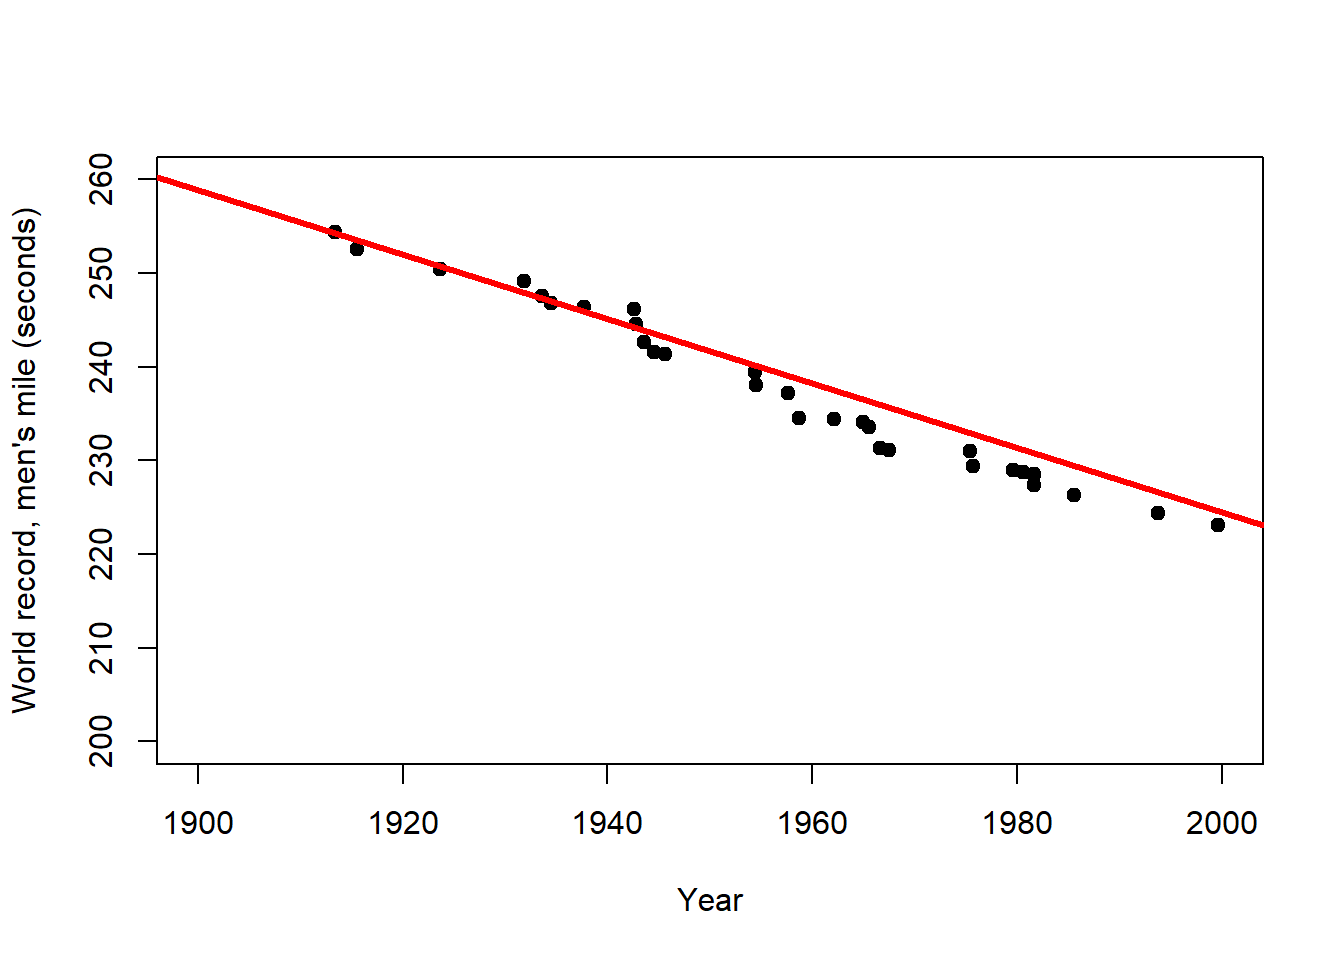 Left: Trend of the world record for the men`s mile over the first half of the 20th century (description). Centre: Extrapolation of this trend over the 2nd half of the 20th century (prediction). Right: Extrapolation of the overall trend until the year 2050 (longer prediction). After: @wainer2009